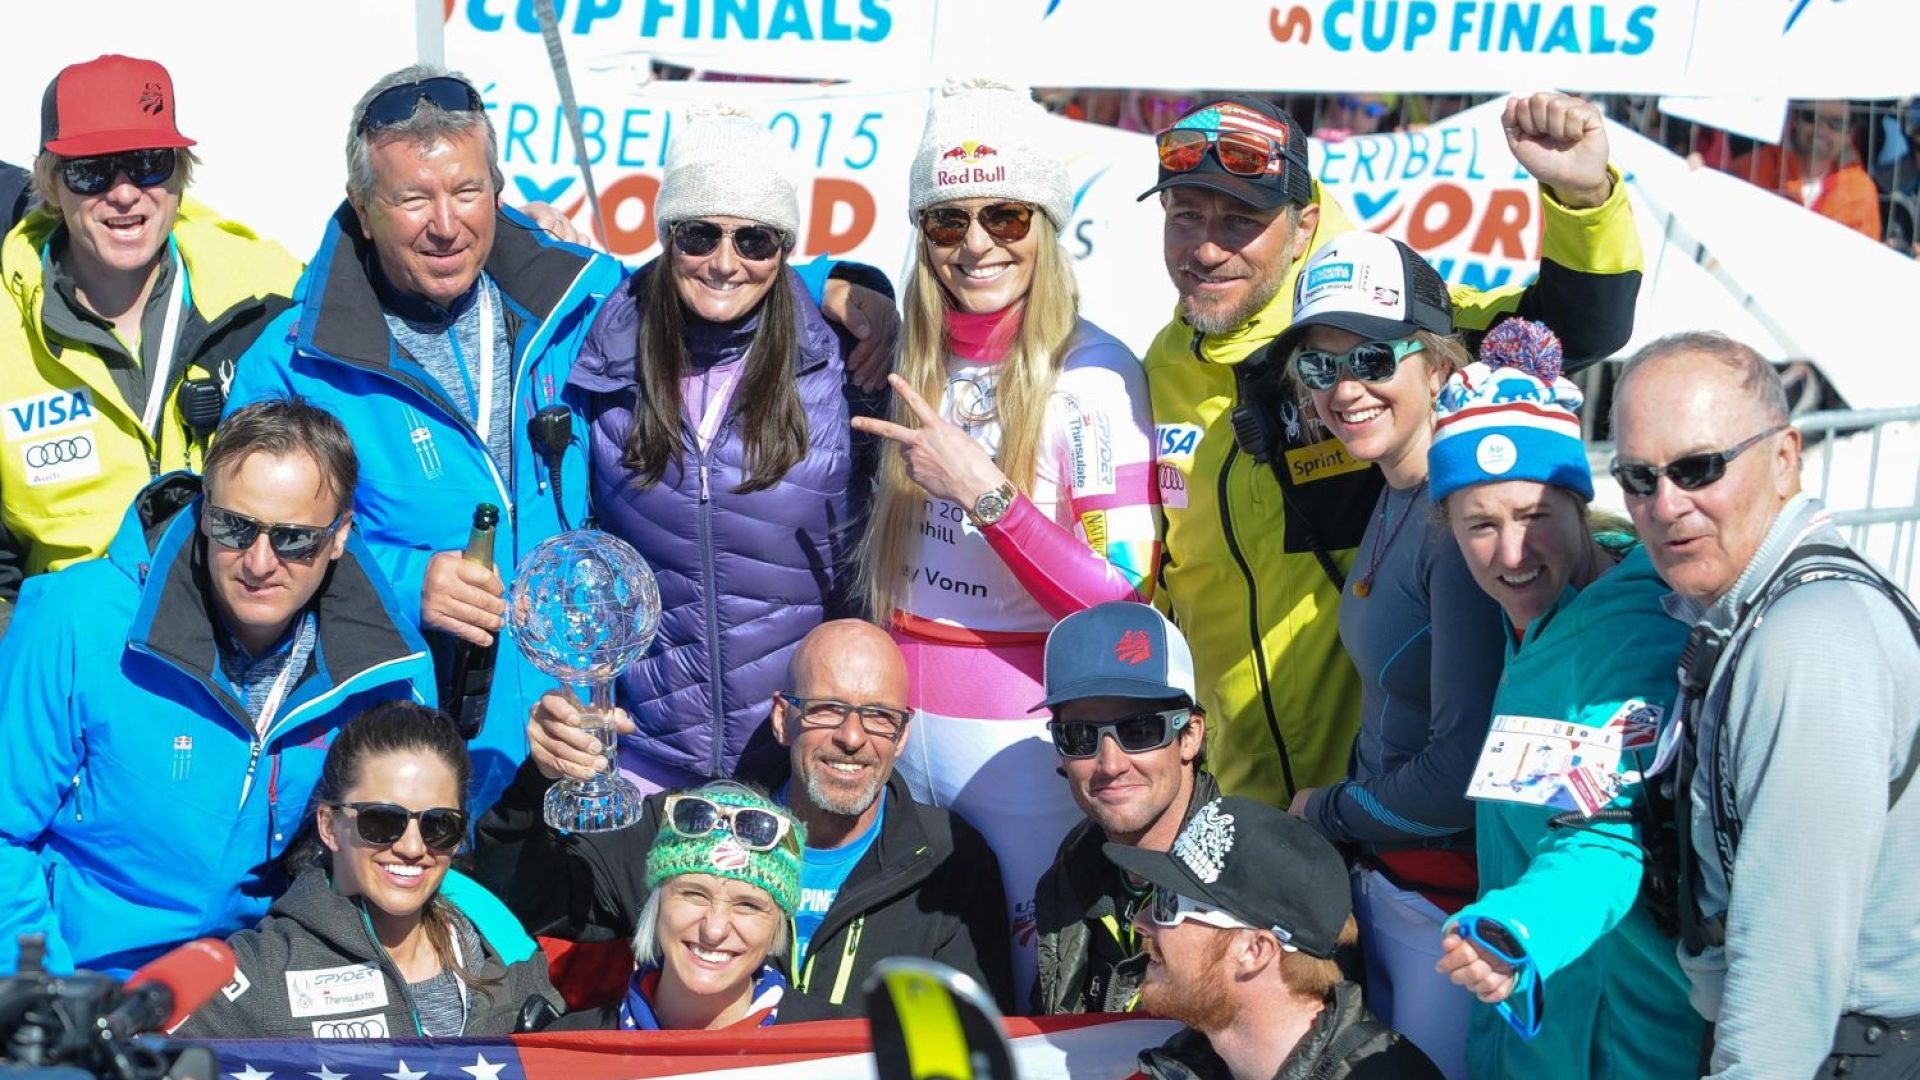 a-successful-dreamteam-lindsey-with-the-us-ski-and-asp-red-bull-team